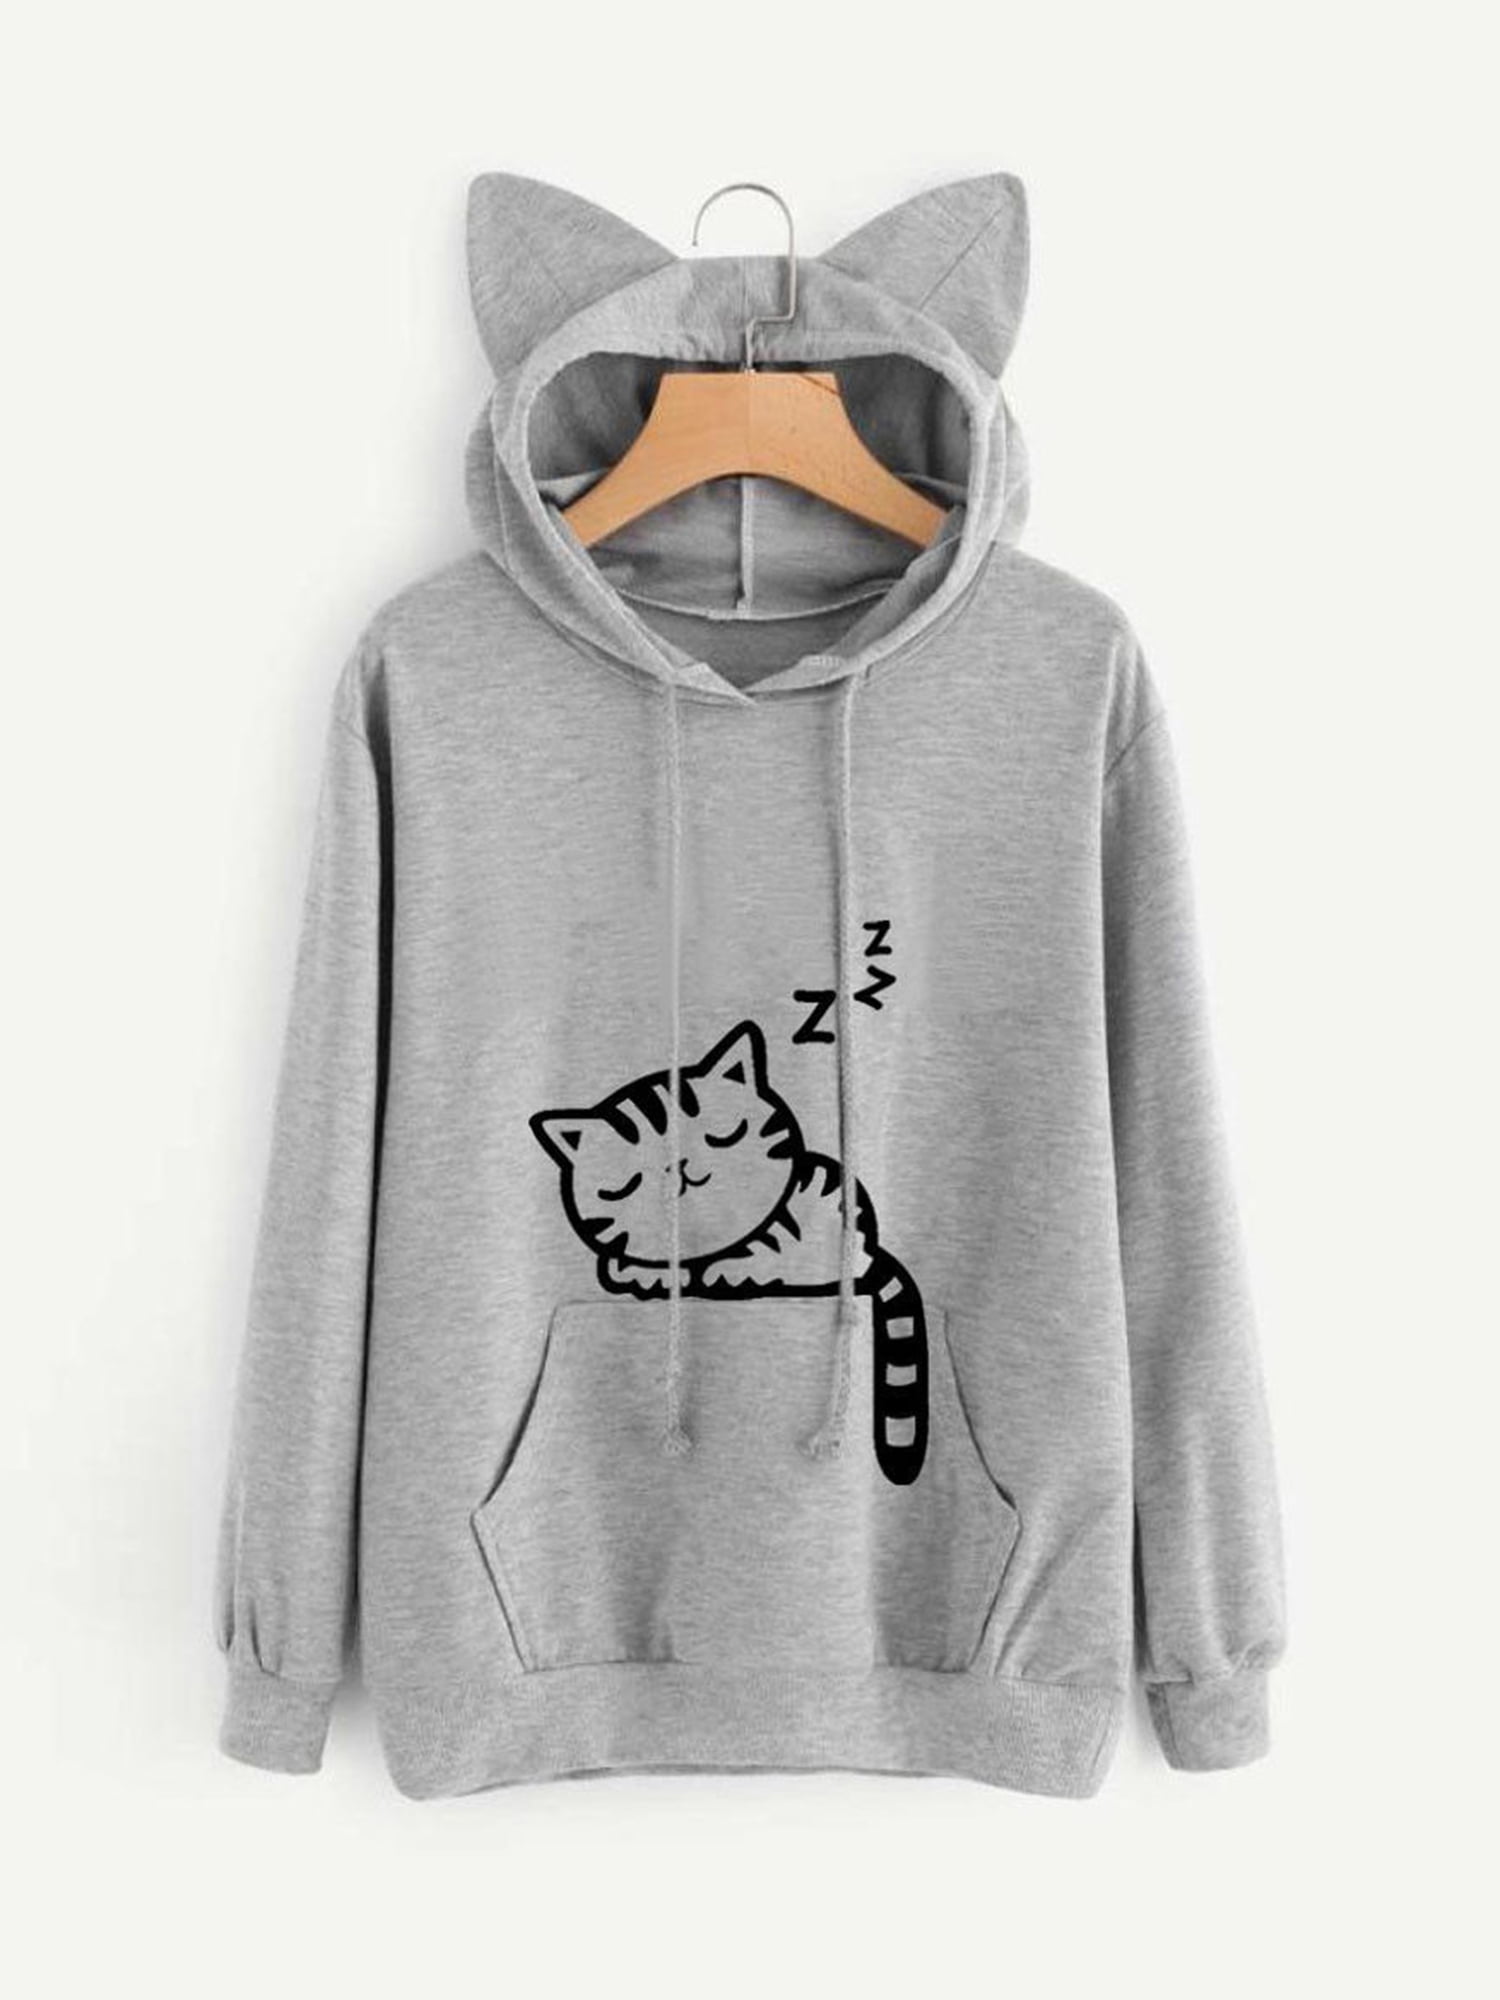 Topcobe - Clothes for Women on Clearance! Women&#39;s Pullover Hoodie for Women, Long Sleeve Cat ...